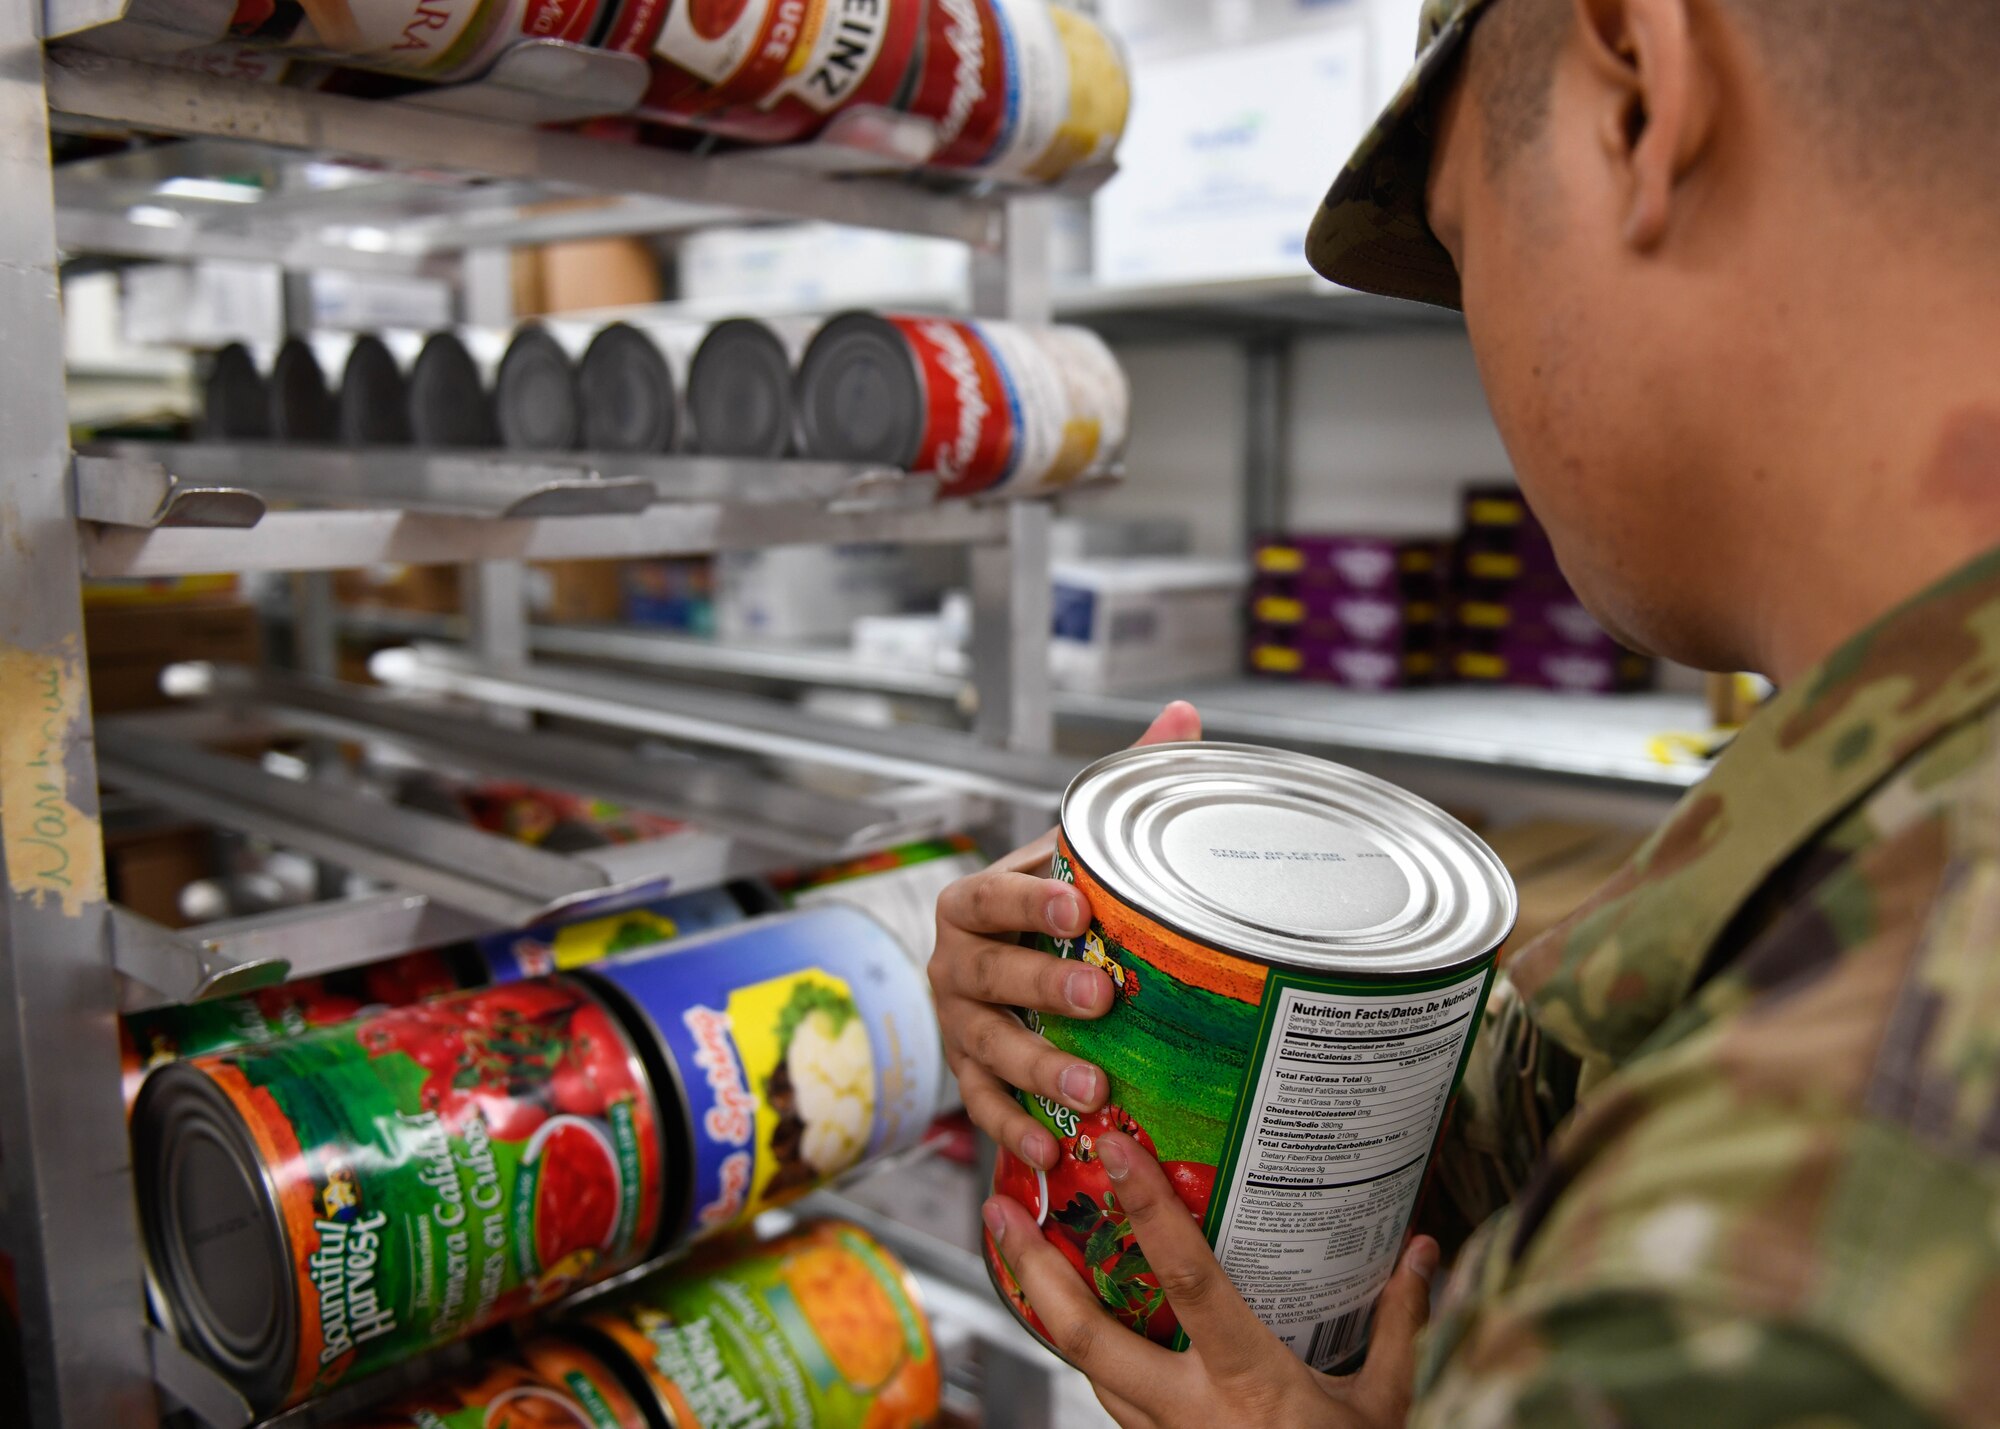 Staff Sgt. Joseph Deguino, 56th Operational Medicine Readiness Squadron Public Health communicable disease noncommissioned officer in charge, checks the expiration date on a canned good during a monthly inspection Jan. 27, 2020, in Club 5/6 at Luke Air Force Base, Ariz. While inspecting facilities, Deguino looks for expiration dates and ensures the food is properly covered. Public health helps keep Airmen healthy, ready to train and deploy by inspecting facilities for food quality, performing audiograms and more. (U.S. Air Force photo by Airman 1st Class by Brooke Moeder)